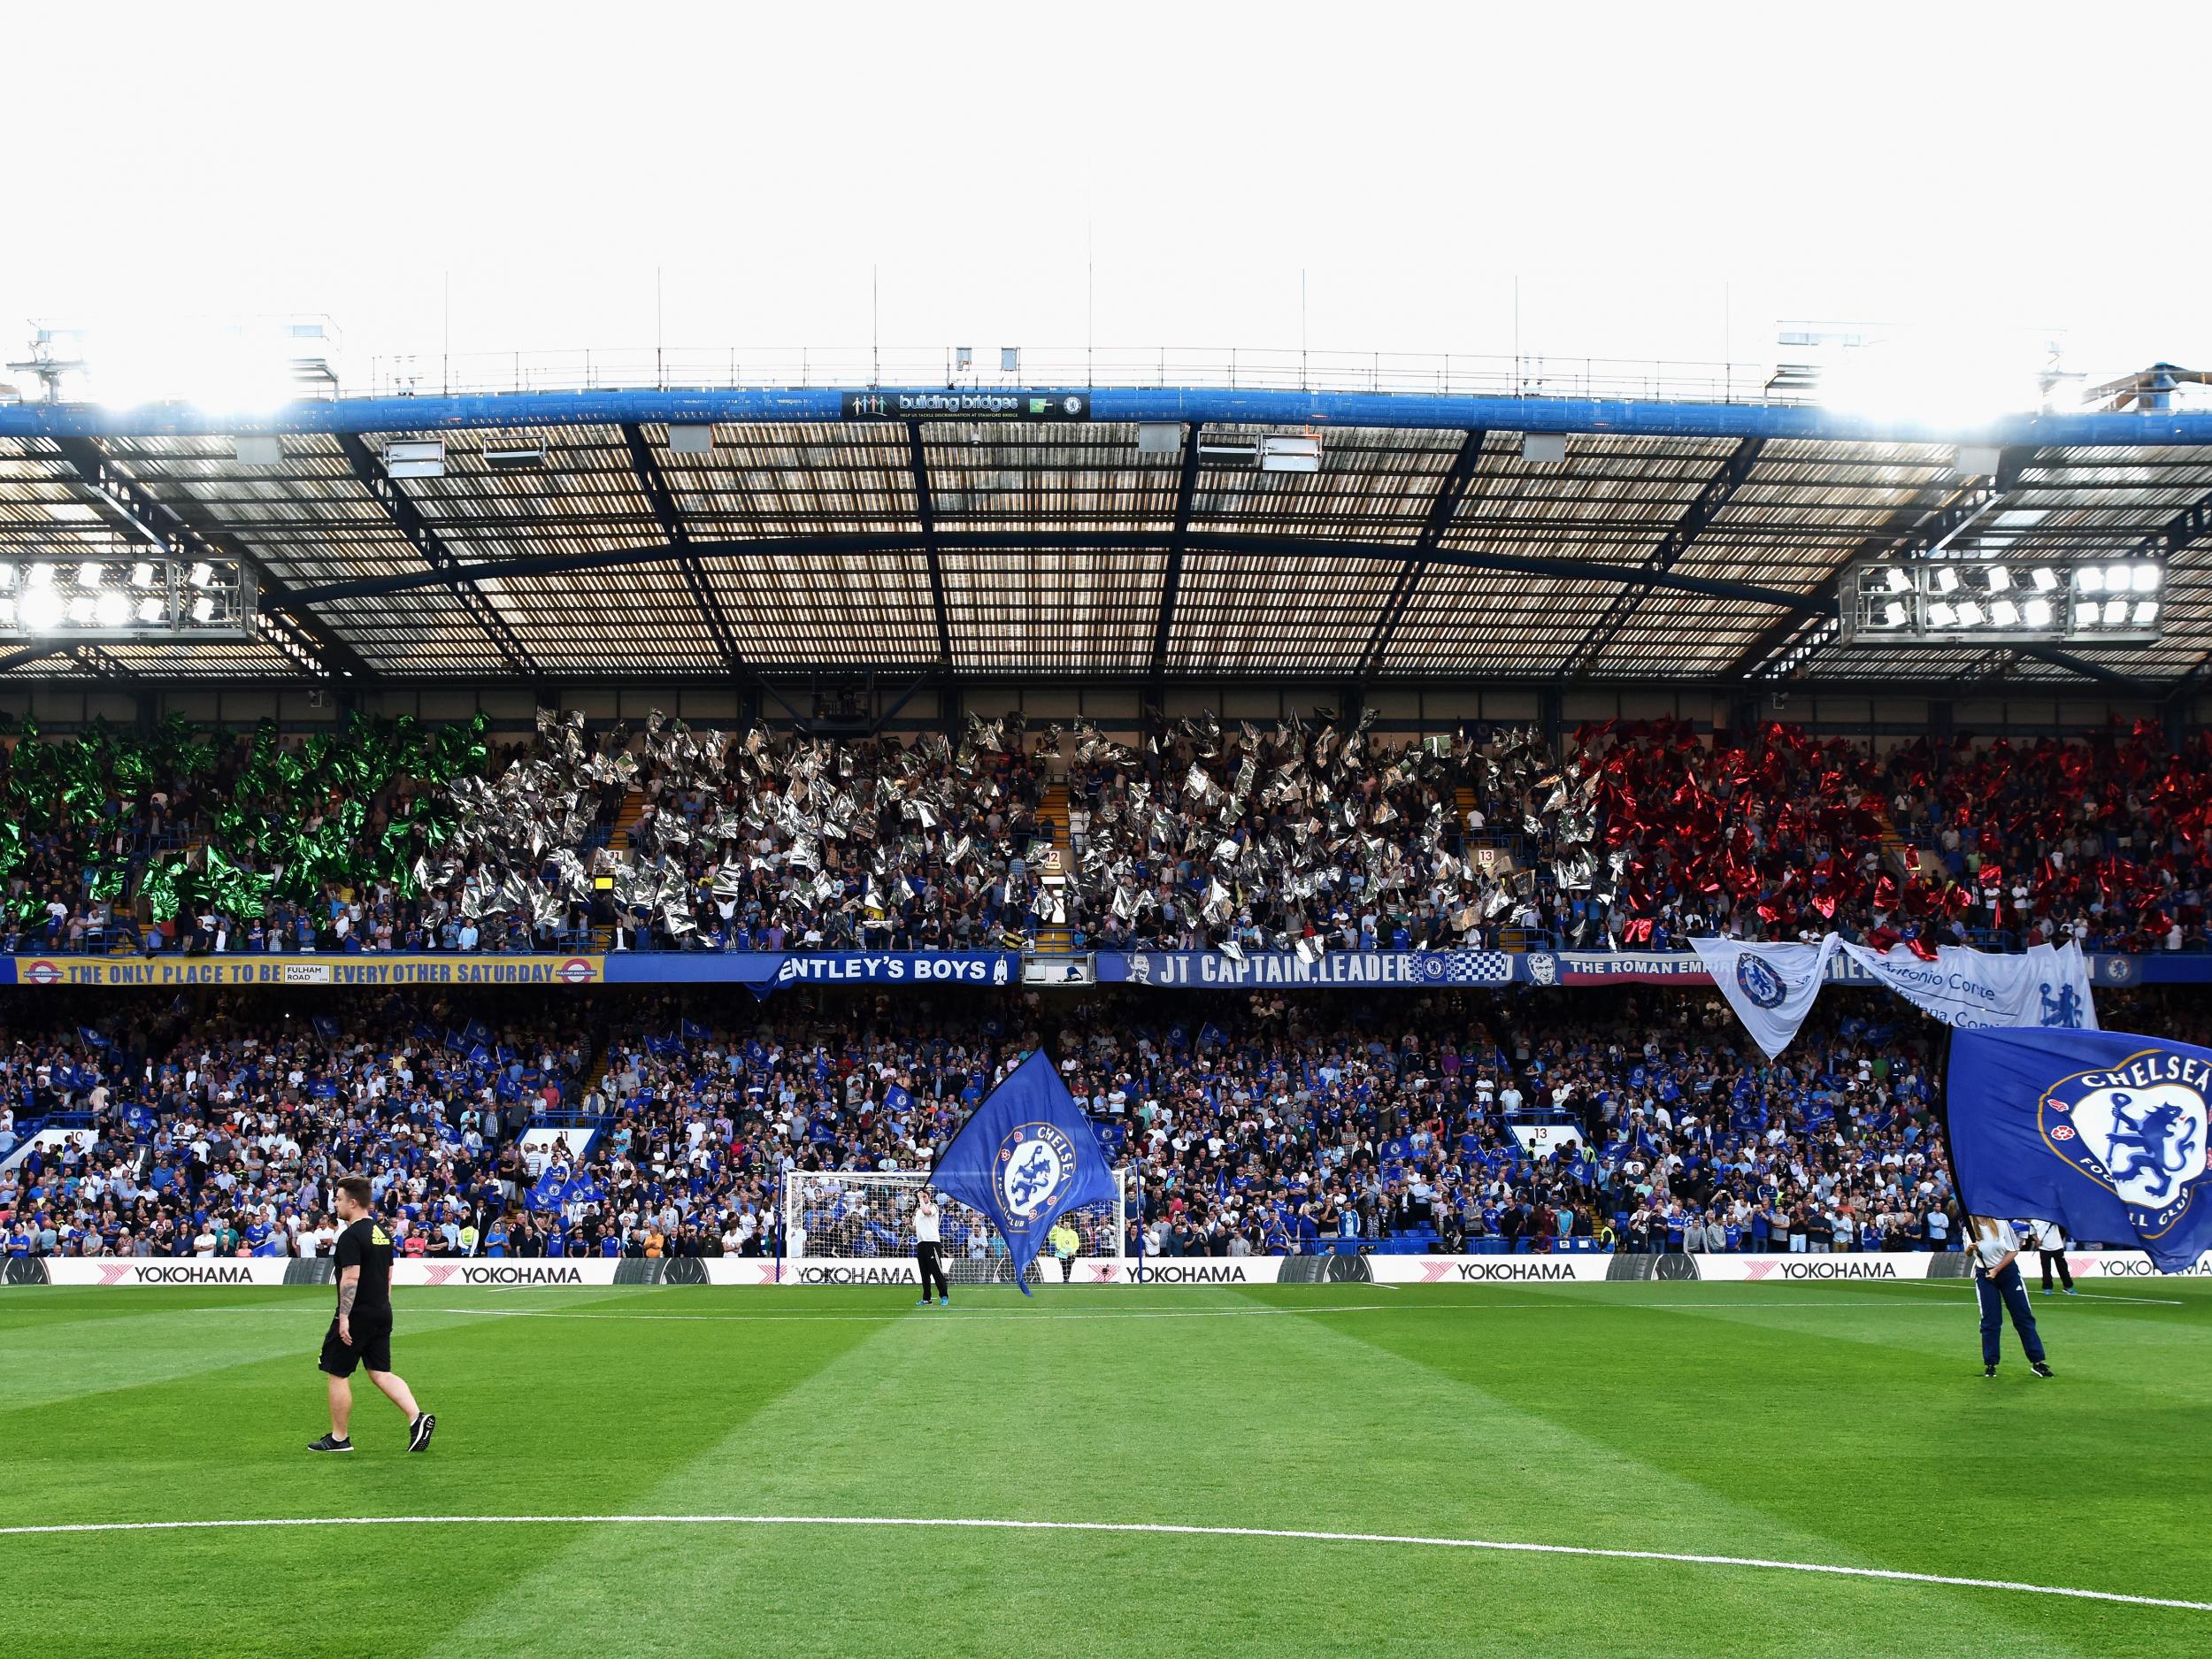 Chelsea offer the biggest discount on a top flight ticket for under 20s